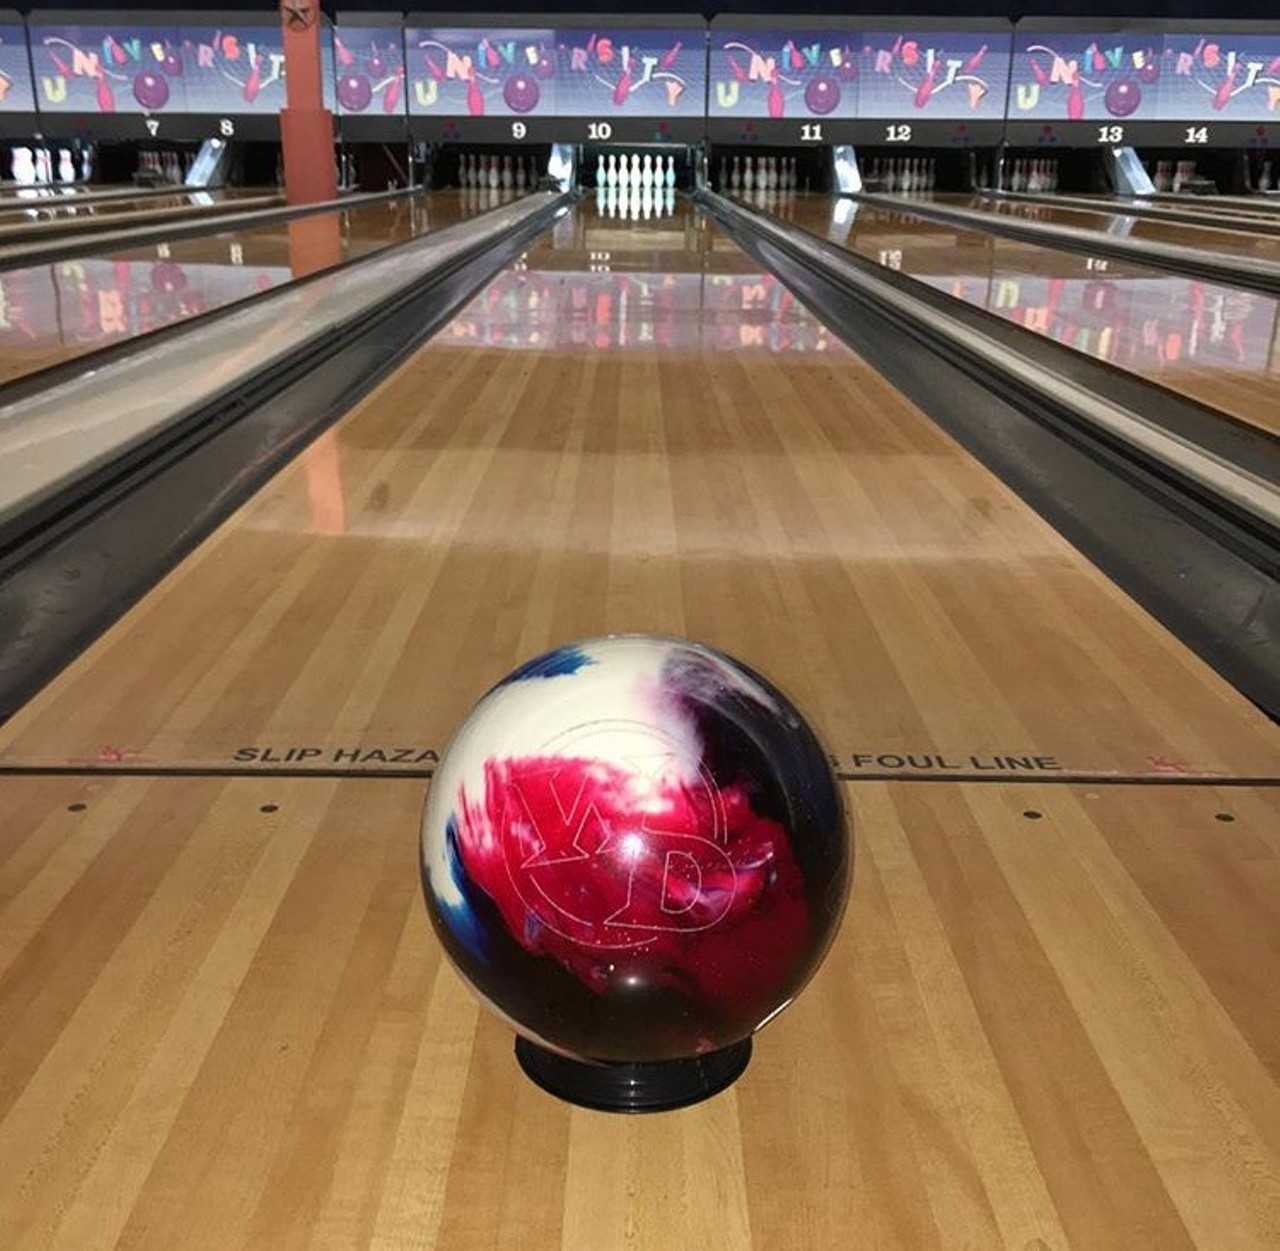 University Bowl
12332 I-10 #10, (210) 699-6235, ubbowl.com
University Bowl has 32 fully animated lanes, an arcade and a pub stocked full of delicious drinks. What more could you ask for?
Photo via Instagram / mig.satx